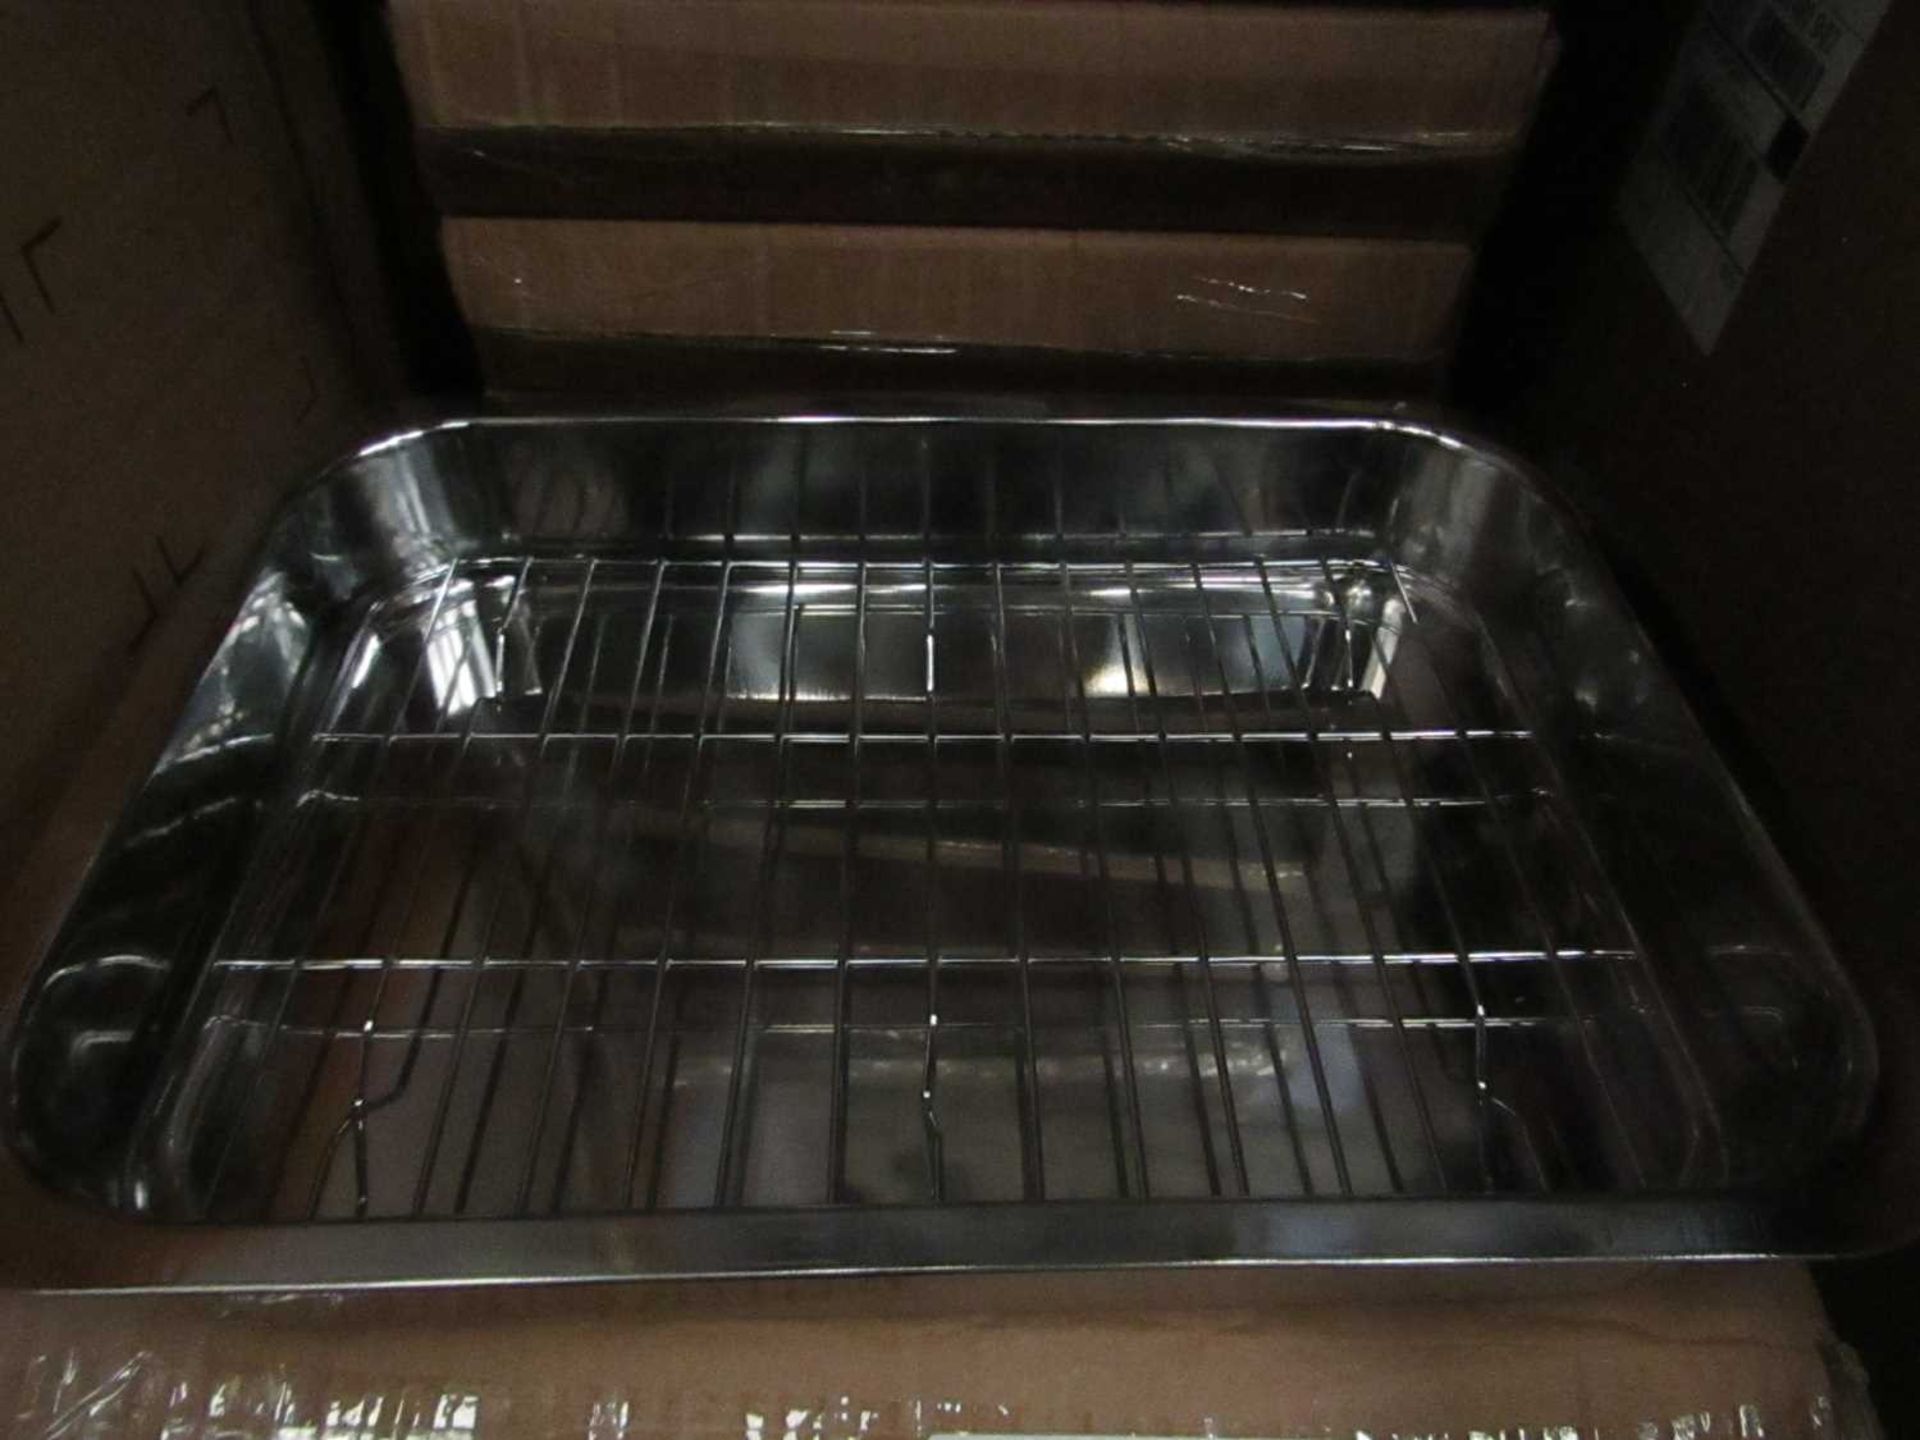 VAT Stainless Steel Baking Tray with Rack Practical Ovenware Tray Baking DishNew & Boxed.